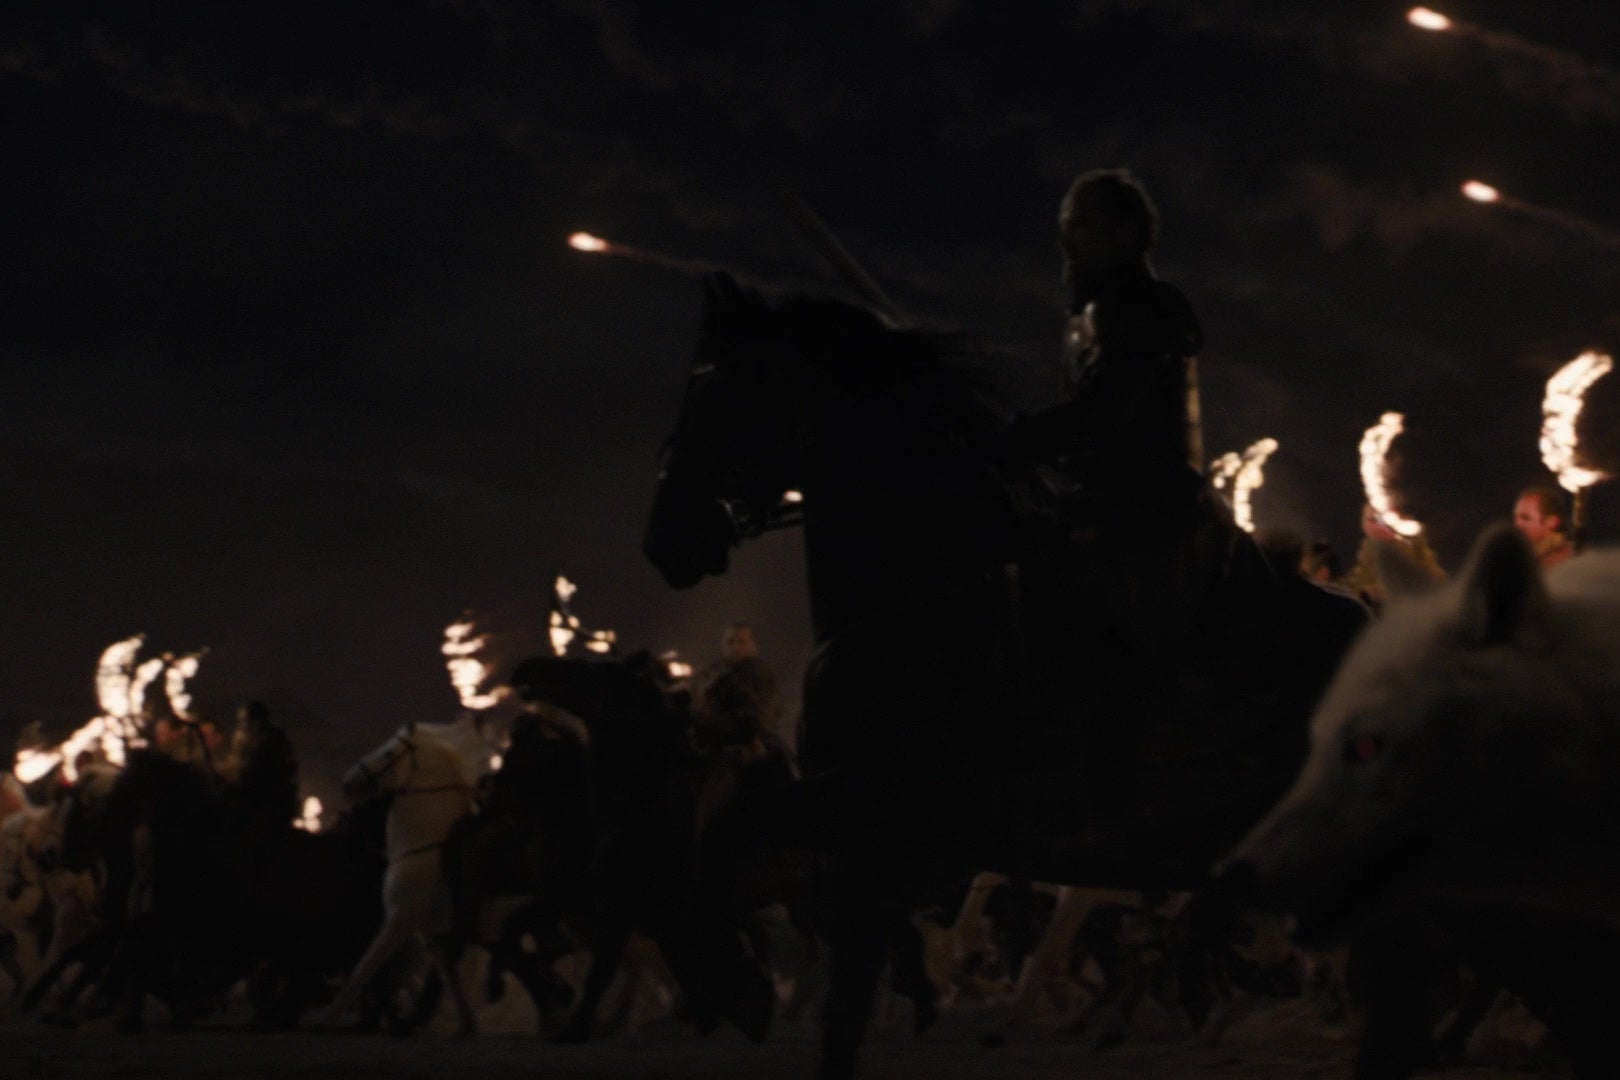 Jorah Mormont on horseback, flanked by a direwolf and rows of mounted Dothraki, charging into battle.